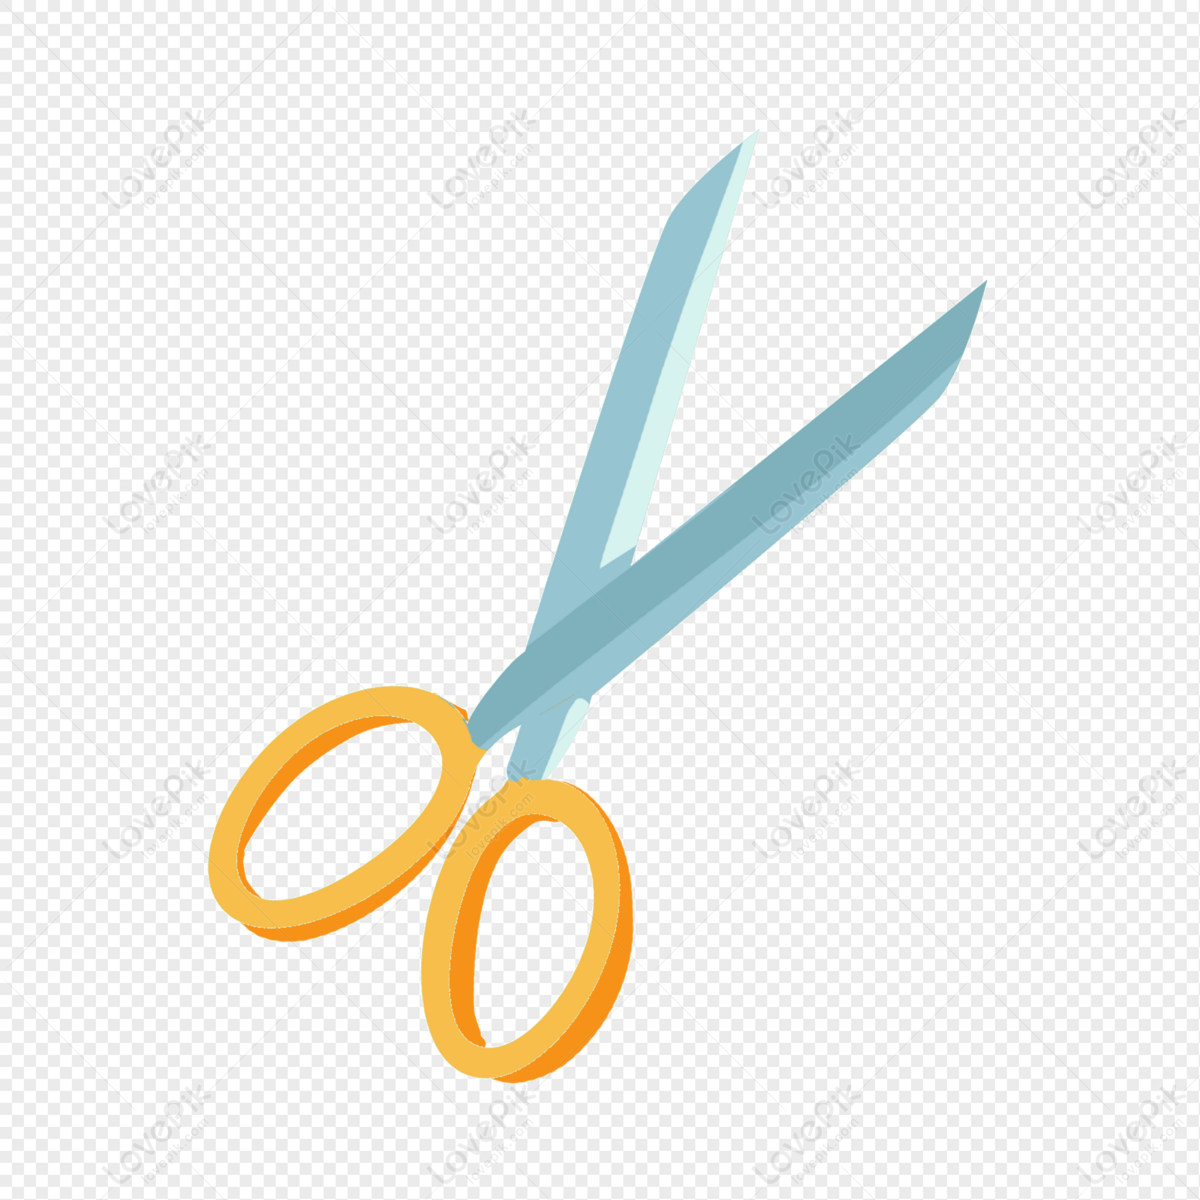 Scissors Cartoon Illustration Free PNG And Clipart Image For Free Download  - Lovepik | 401502549